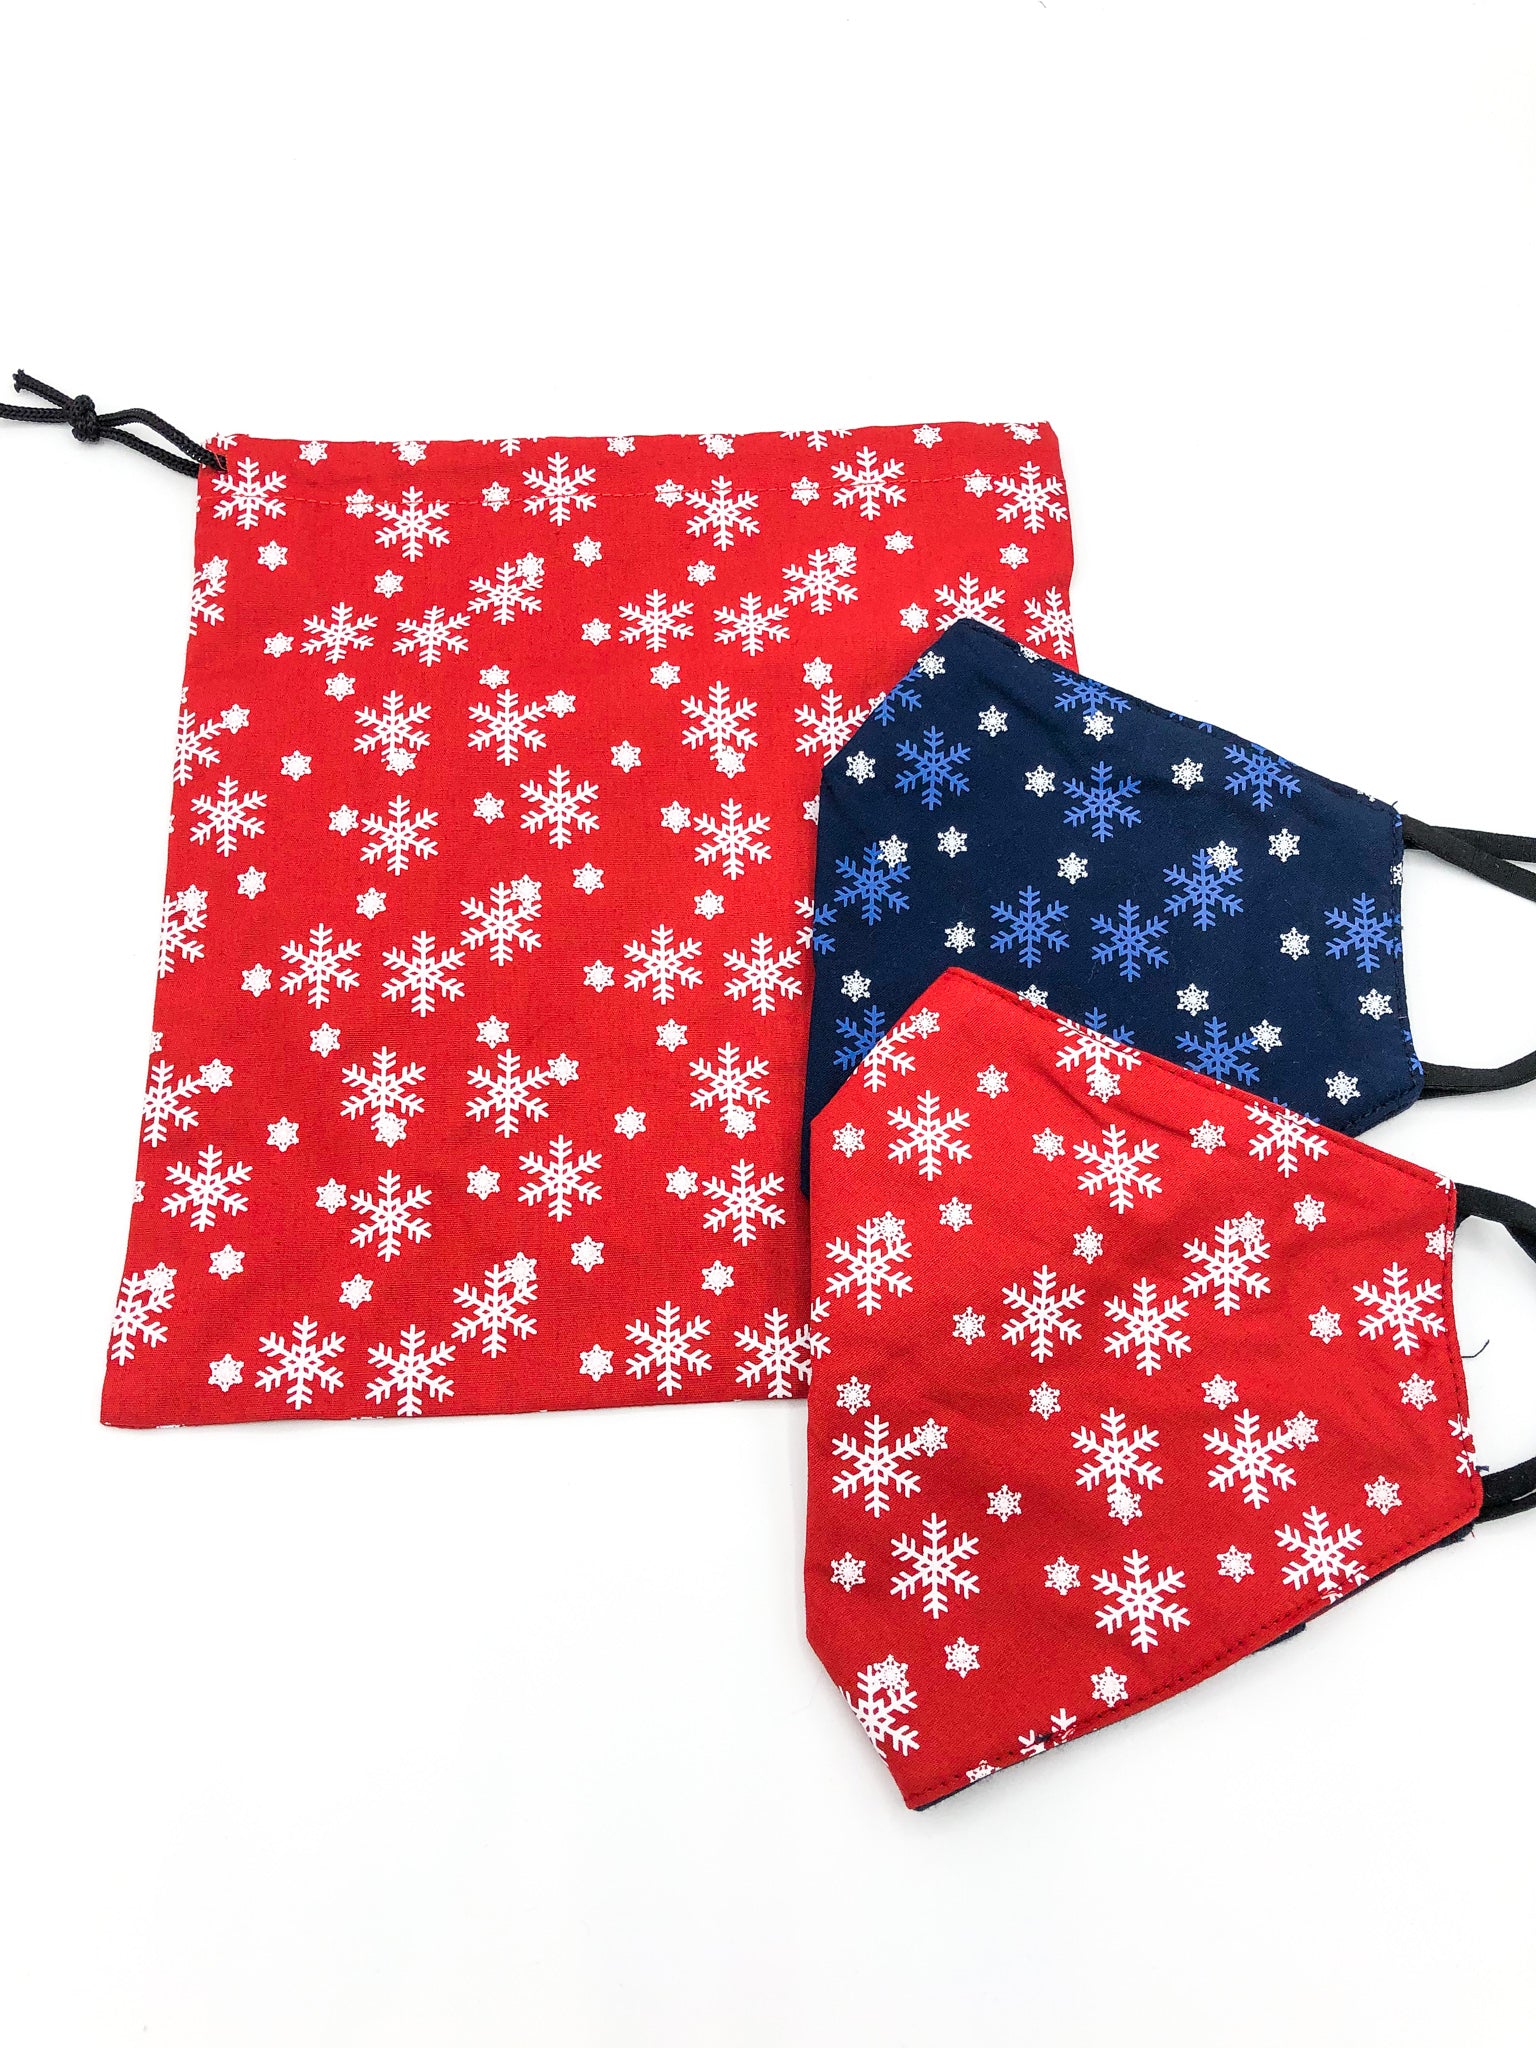 Red and Navy Christmas Face Covering with Fabric Bag